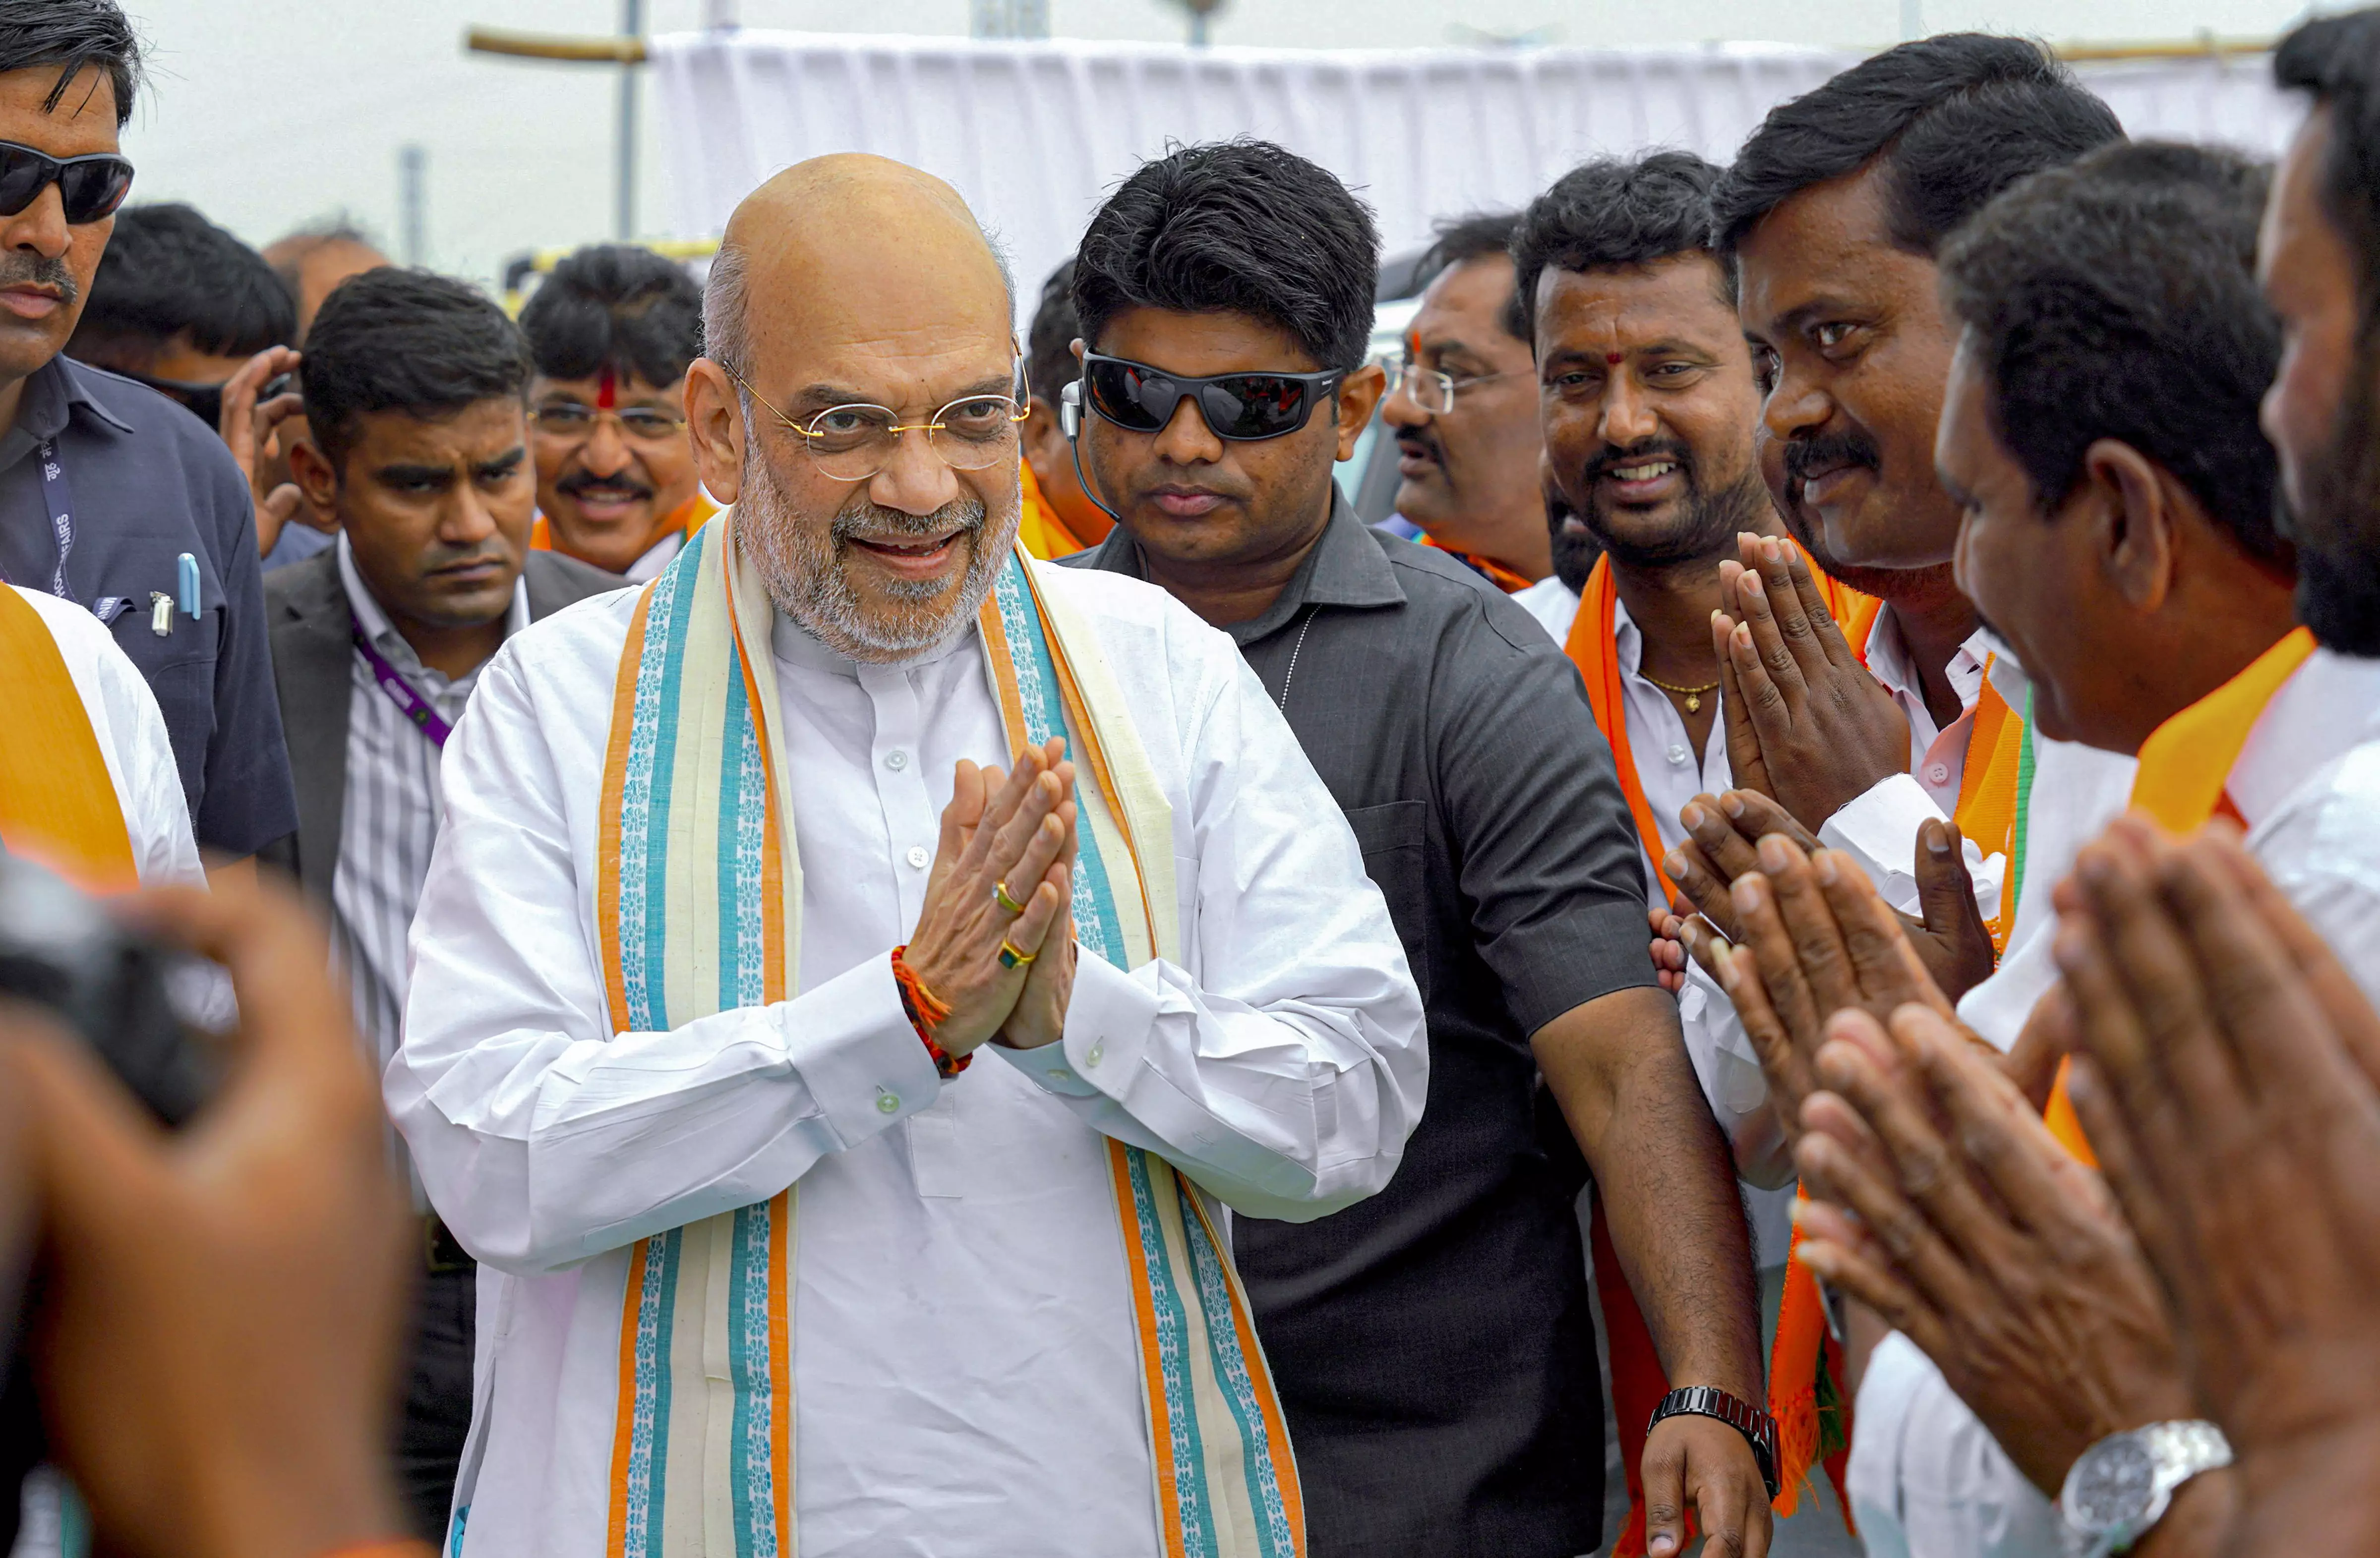 Atmosphere of anger against BRS, no one wants KCR to return to power: Amit Shah